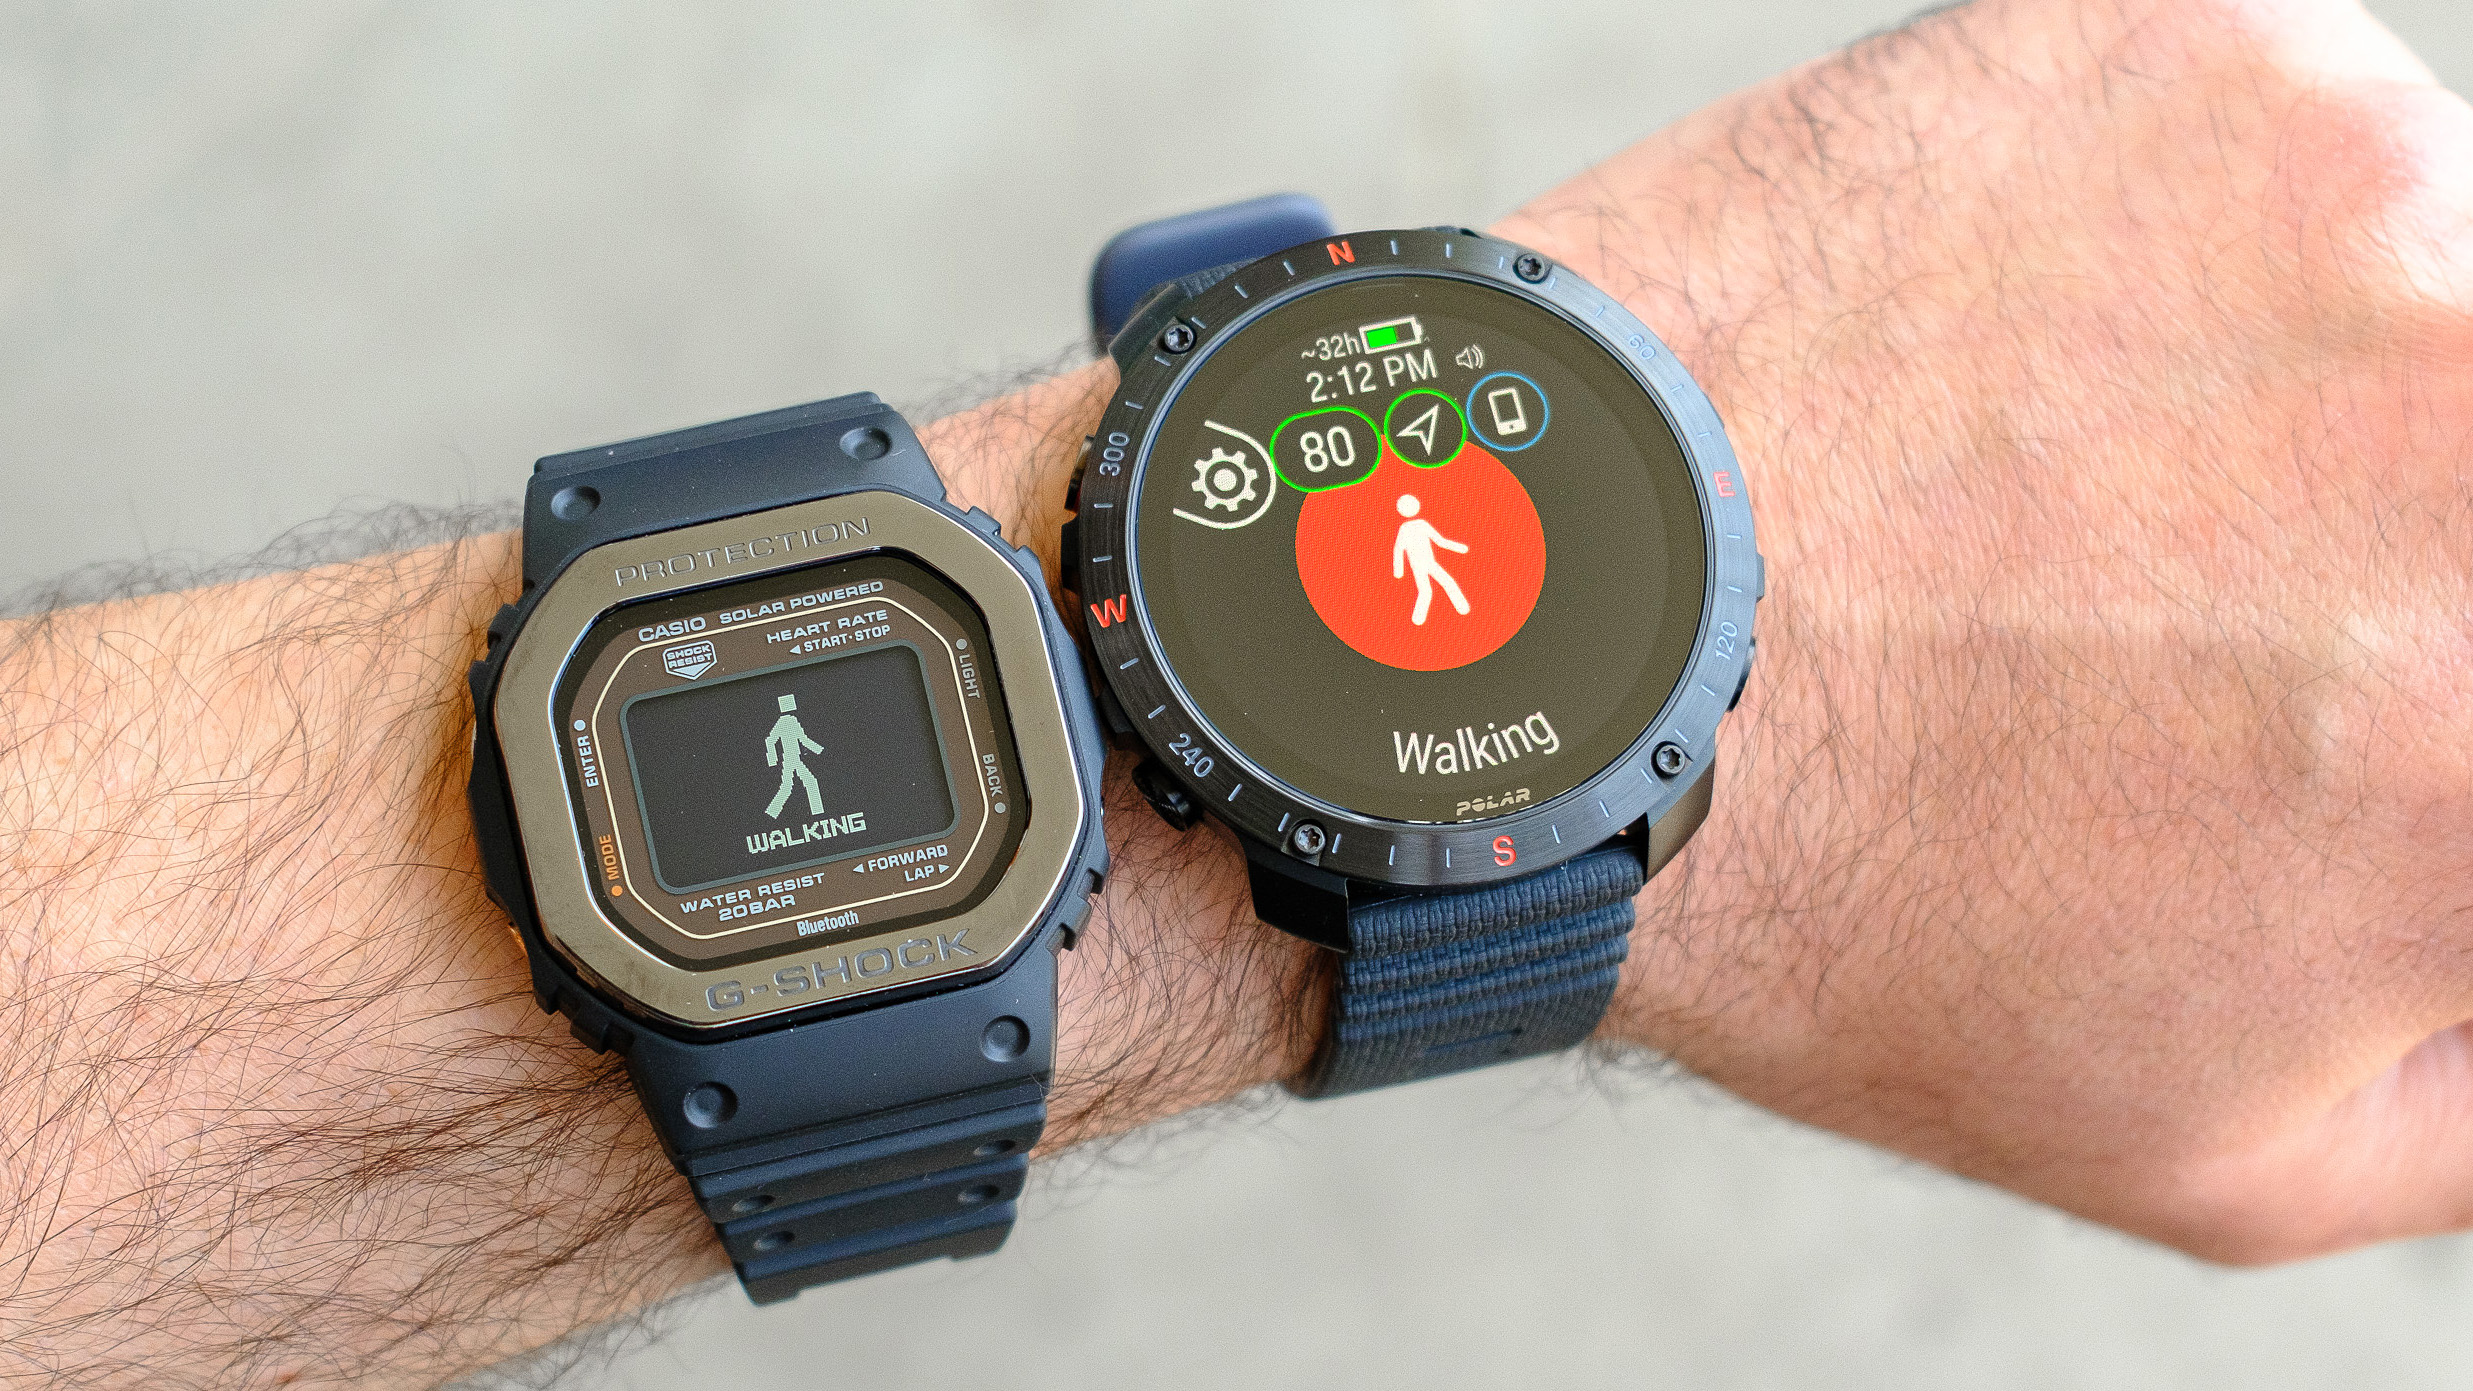 The G-Shock Move and Polar Grit X2 Pro smartwatches on the same wrist